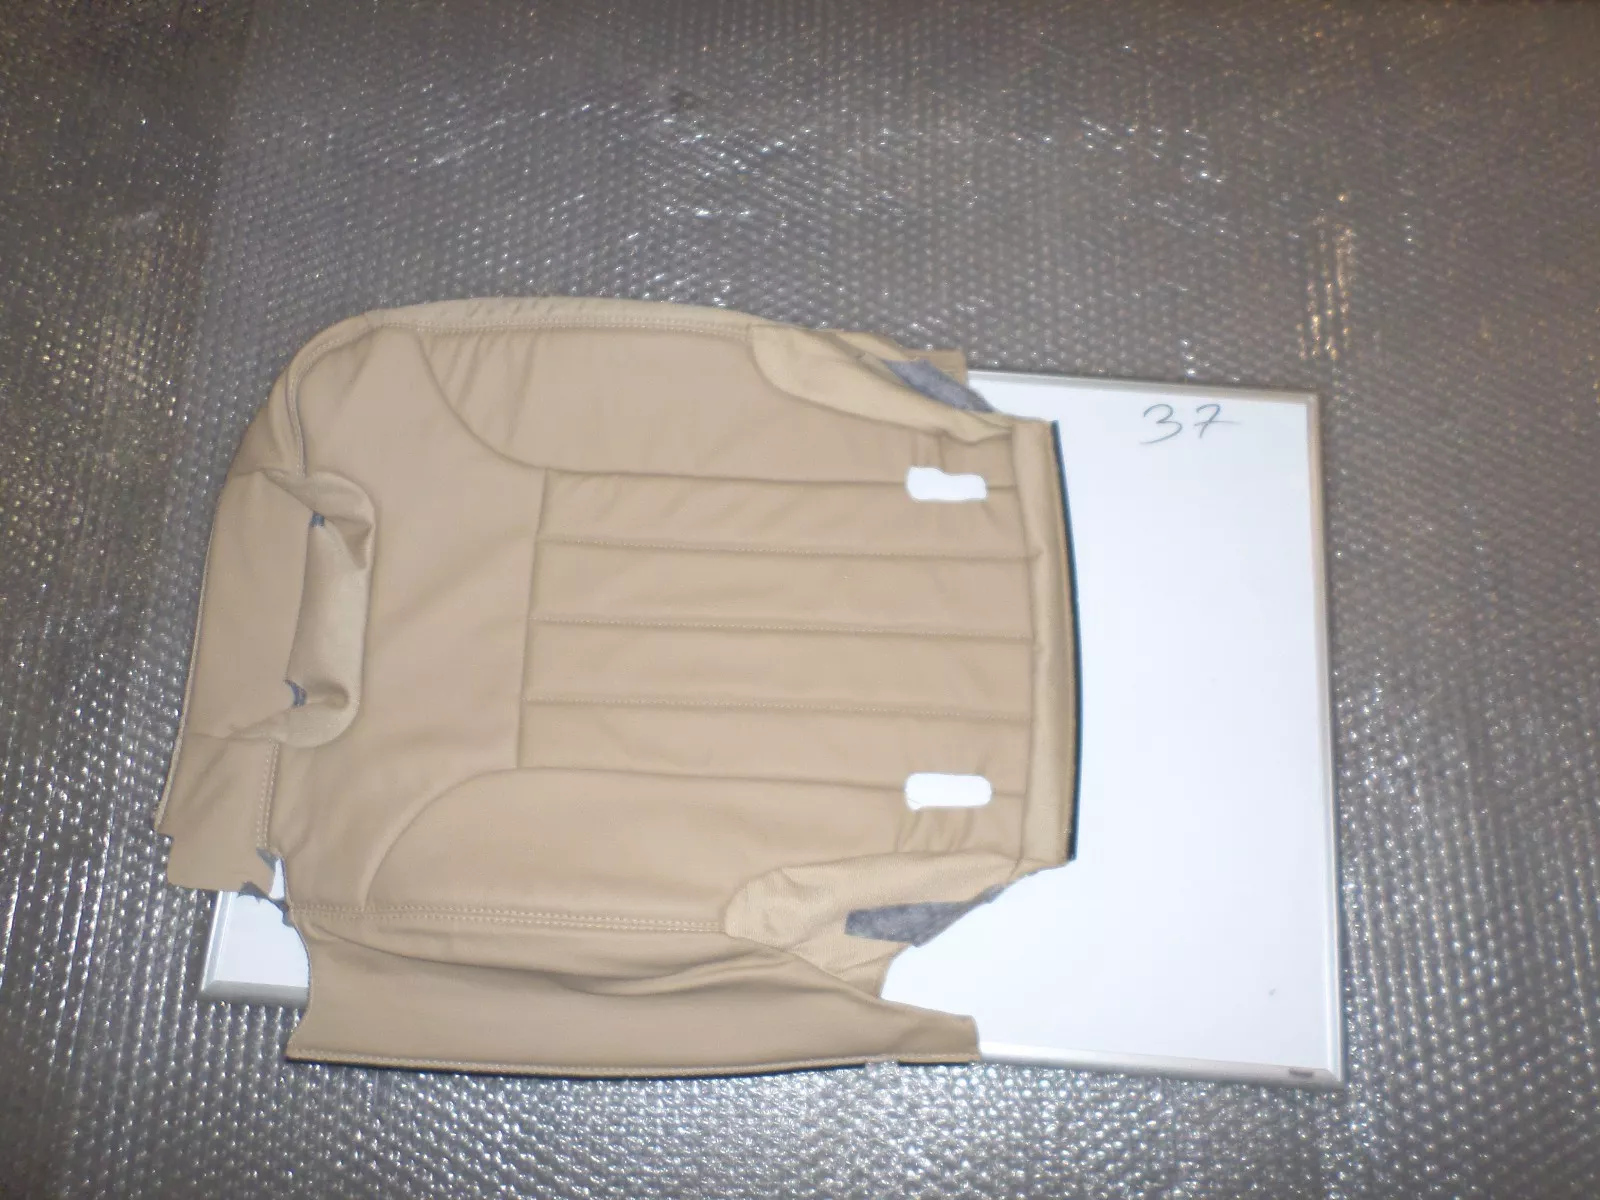 New OEM Mercedes 3rd Row LH Seat Cover 2006-2013 R-Class 251-930-08-87-8K55 - £77.67 GBP